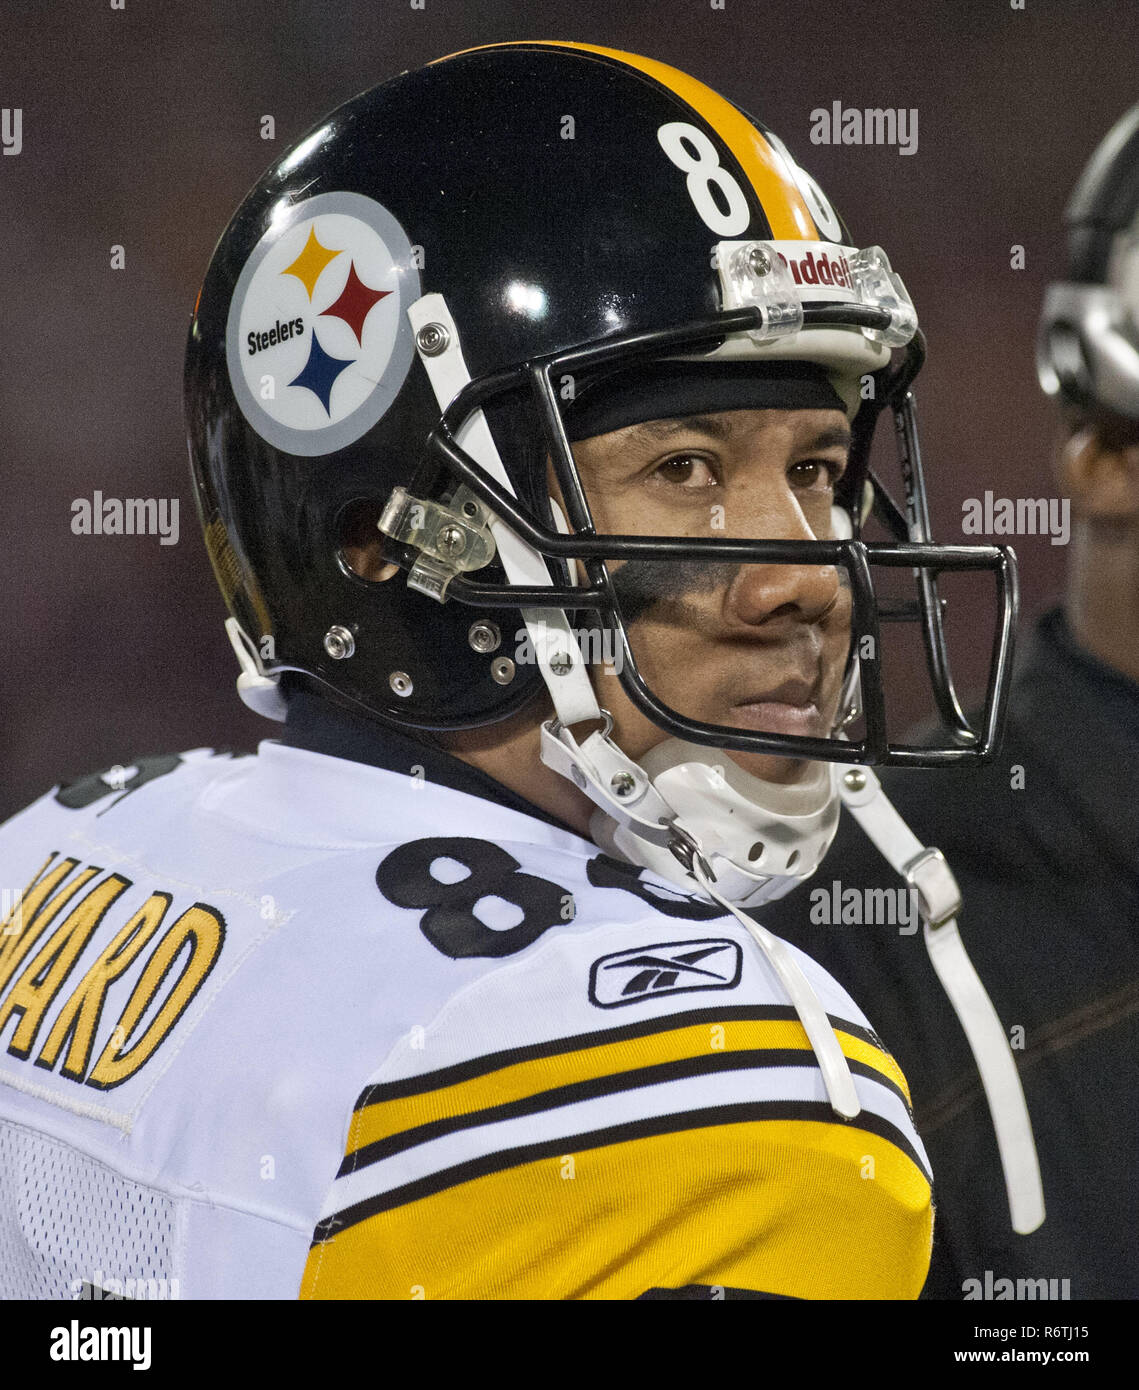 December 19, 2011 - San Francisco, California, U.S - Pittsburgh Steelers wide receiver Hines Ward (86) on Monday, December 19, 2011 at Candlestick Park, San Francisco, California.  49ers defeated the Steelers 20-3. (Credit Image: © Al Golub/ZUMA Wire) Stock Photo